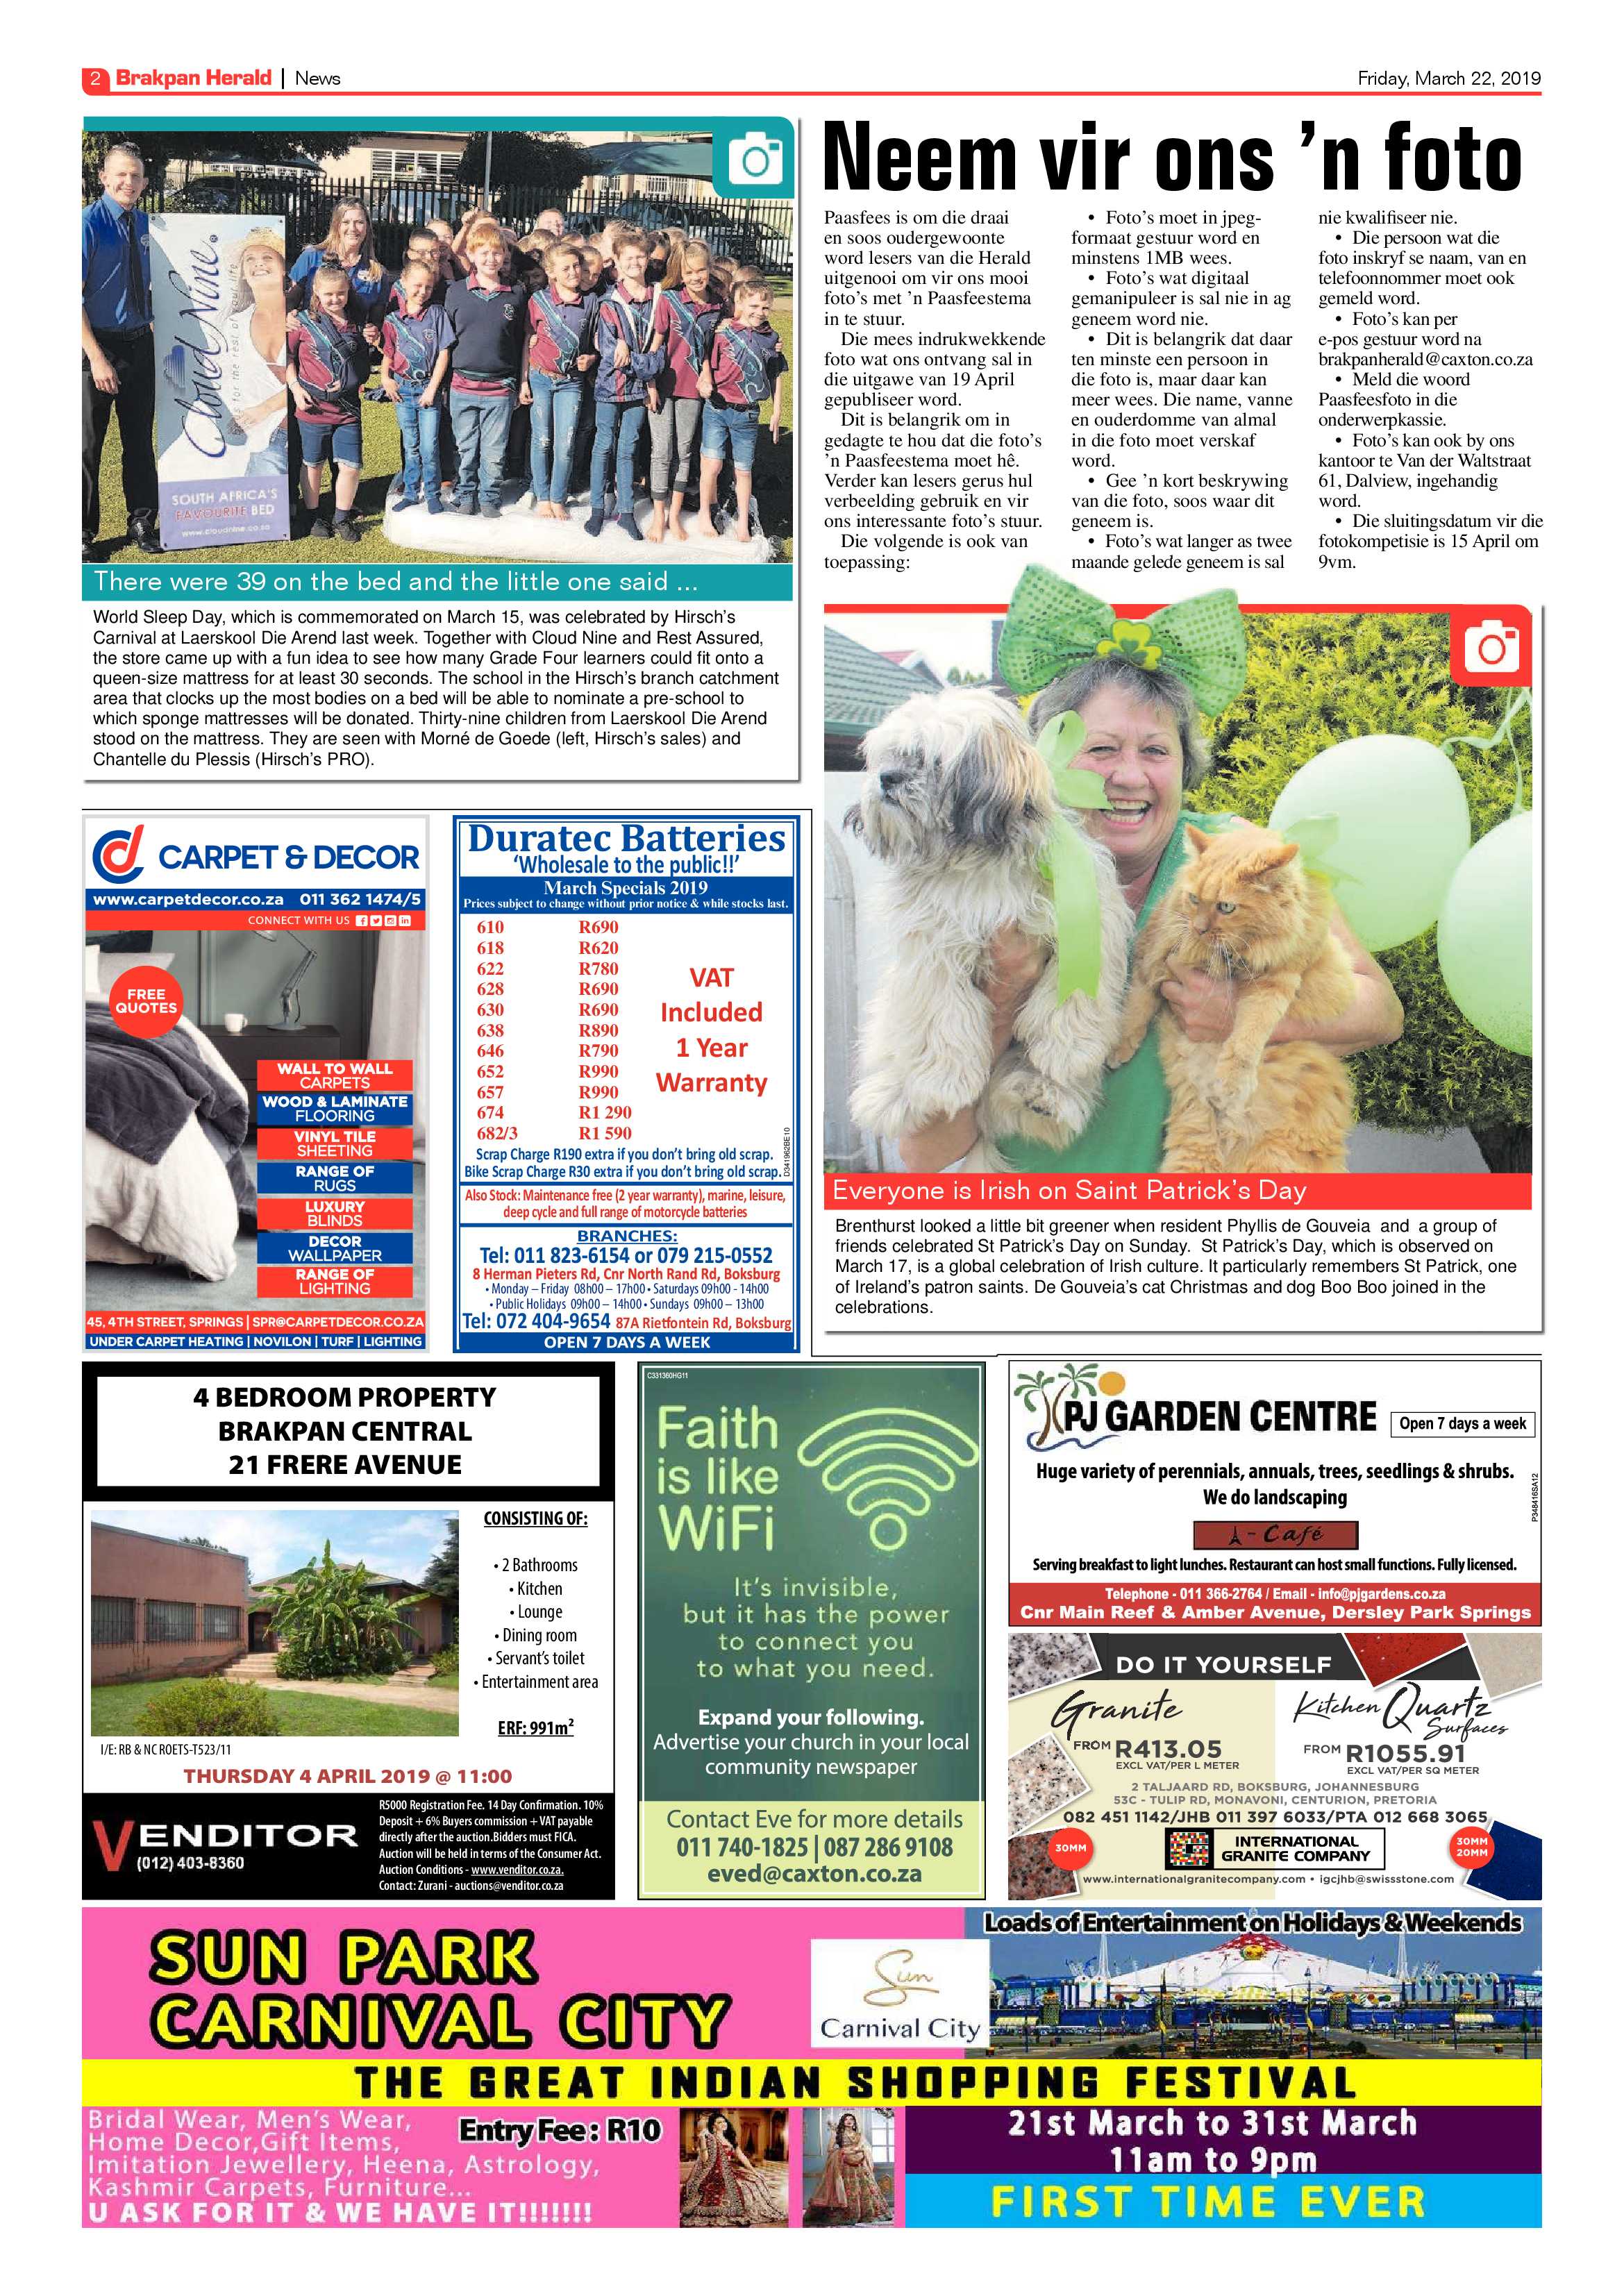 Brakpan Herald 22 March 2019 page 2